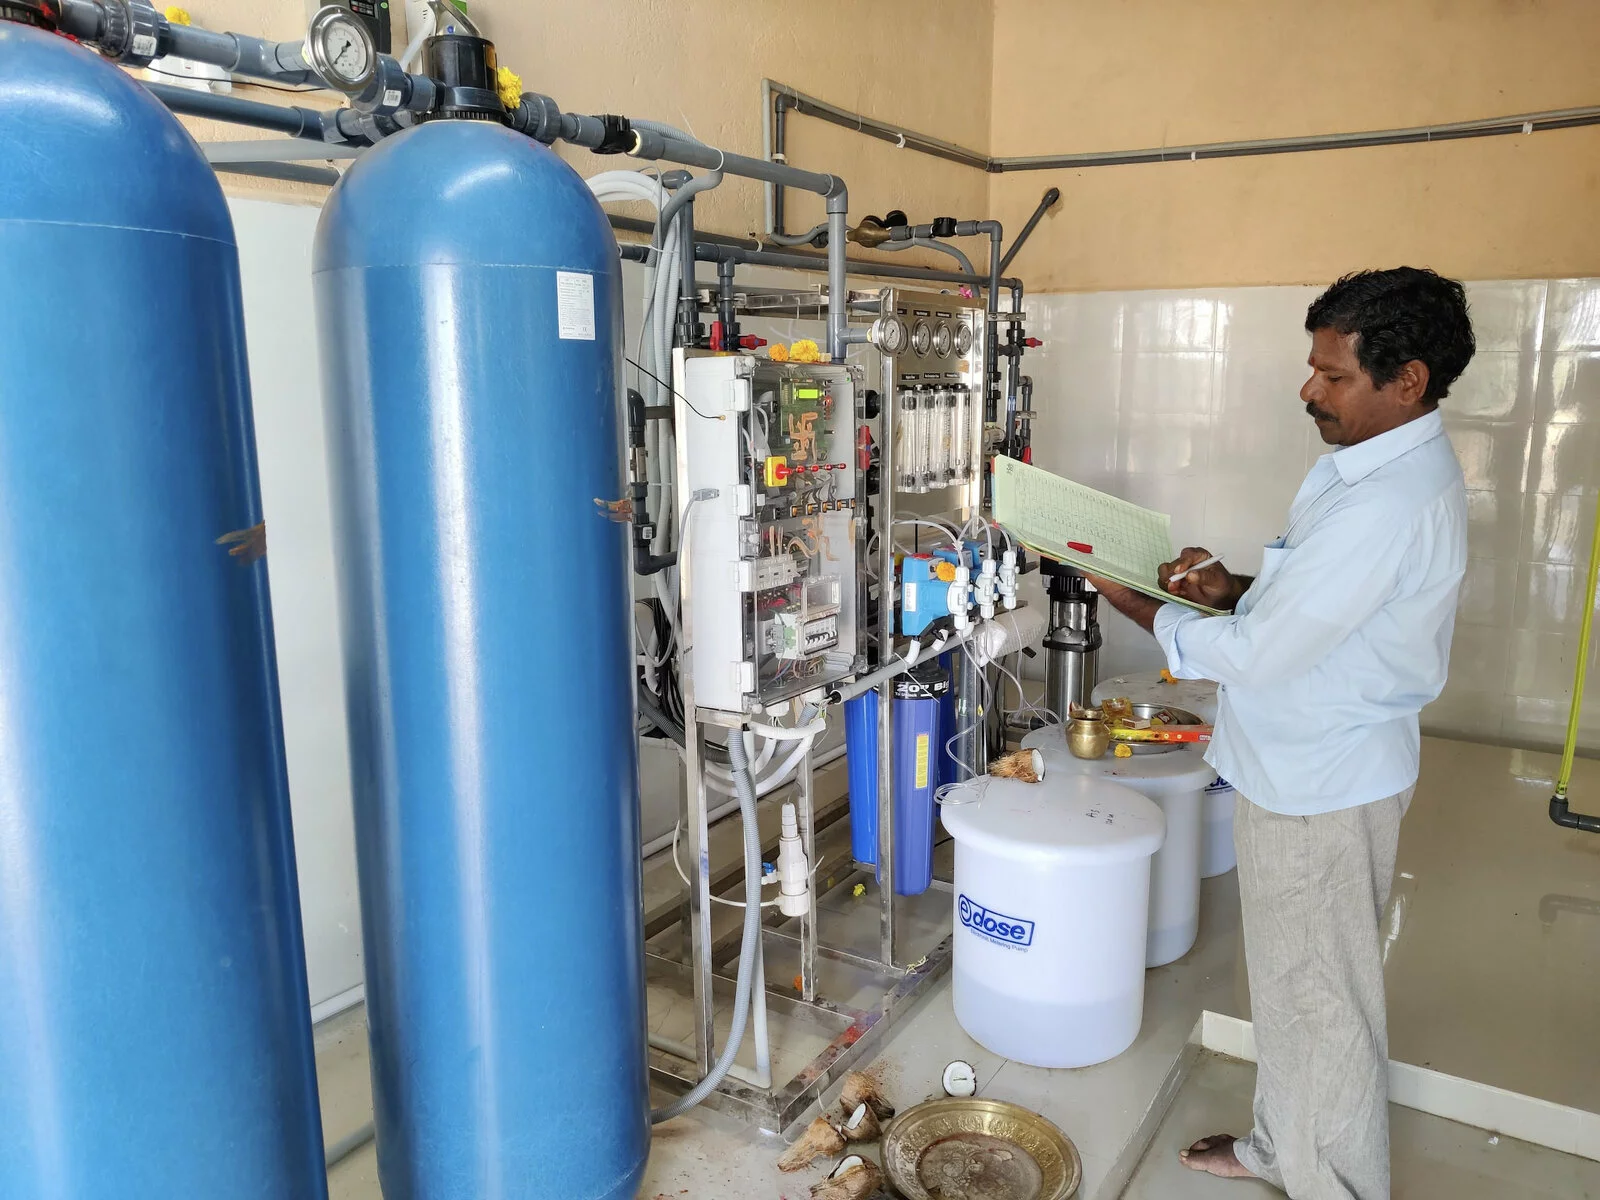  2020/05/Improving-the-Performance-of-Decentralized-Water-Purification-Systems-2.jpg 